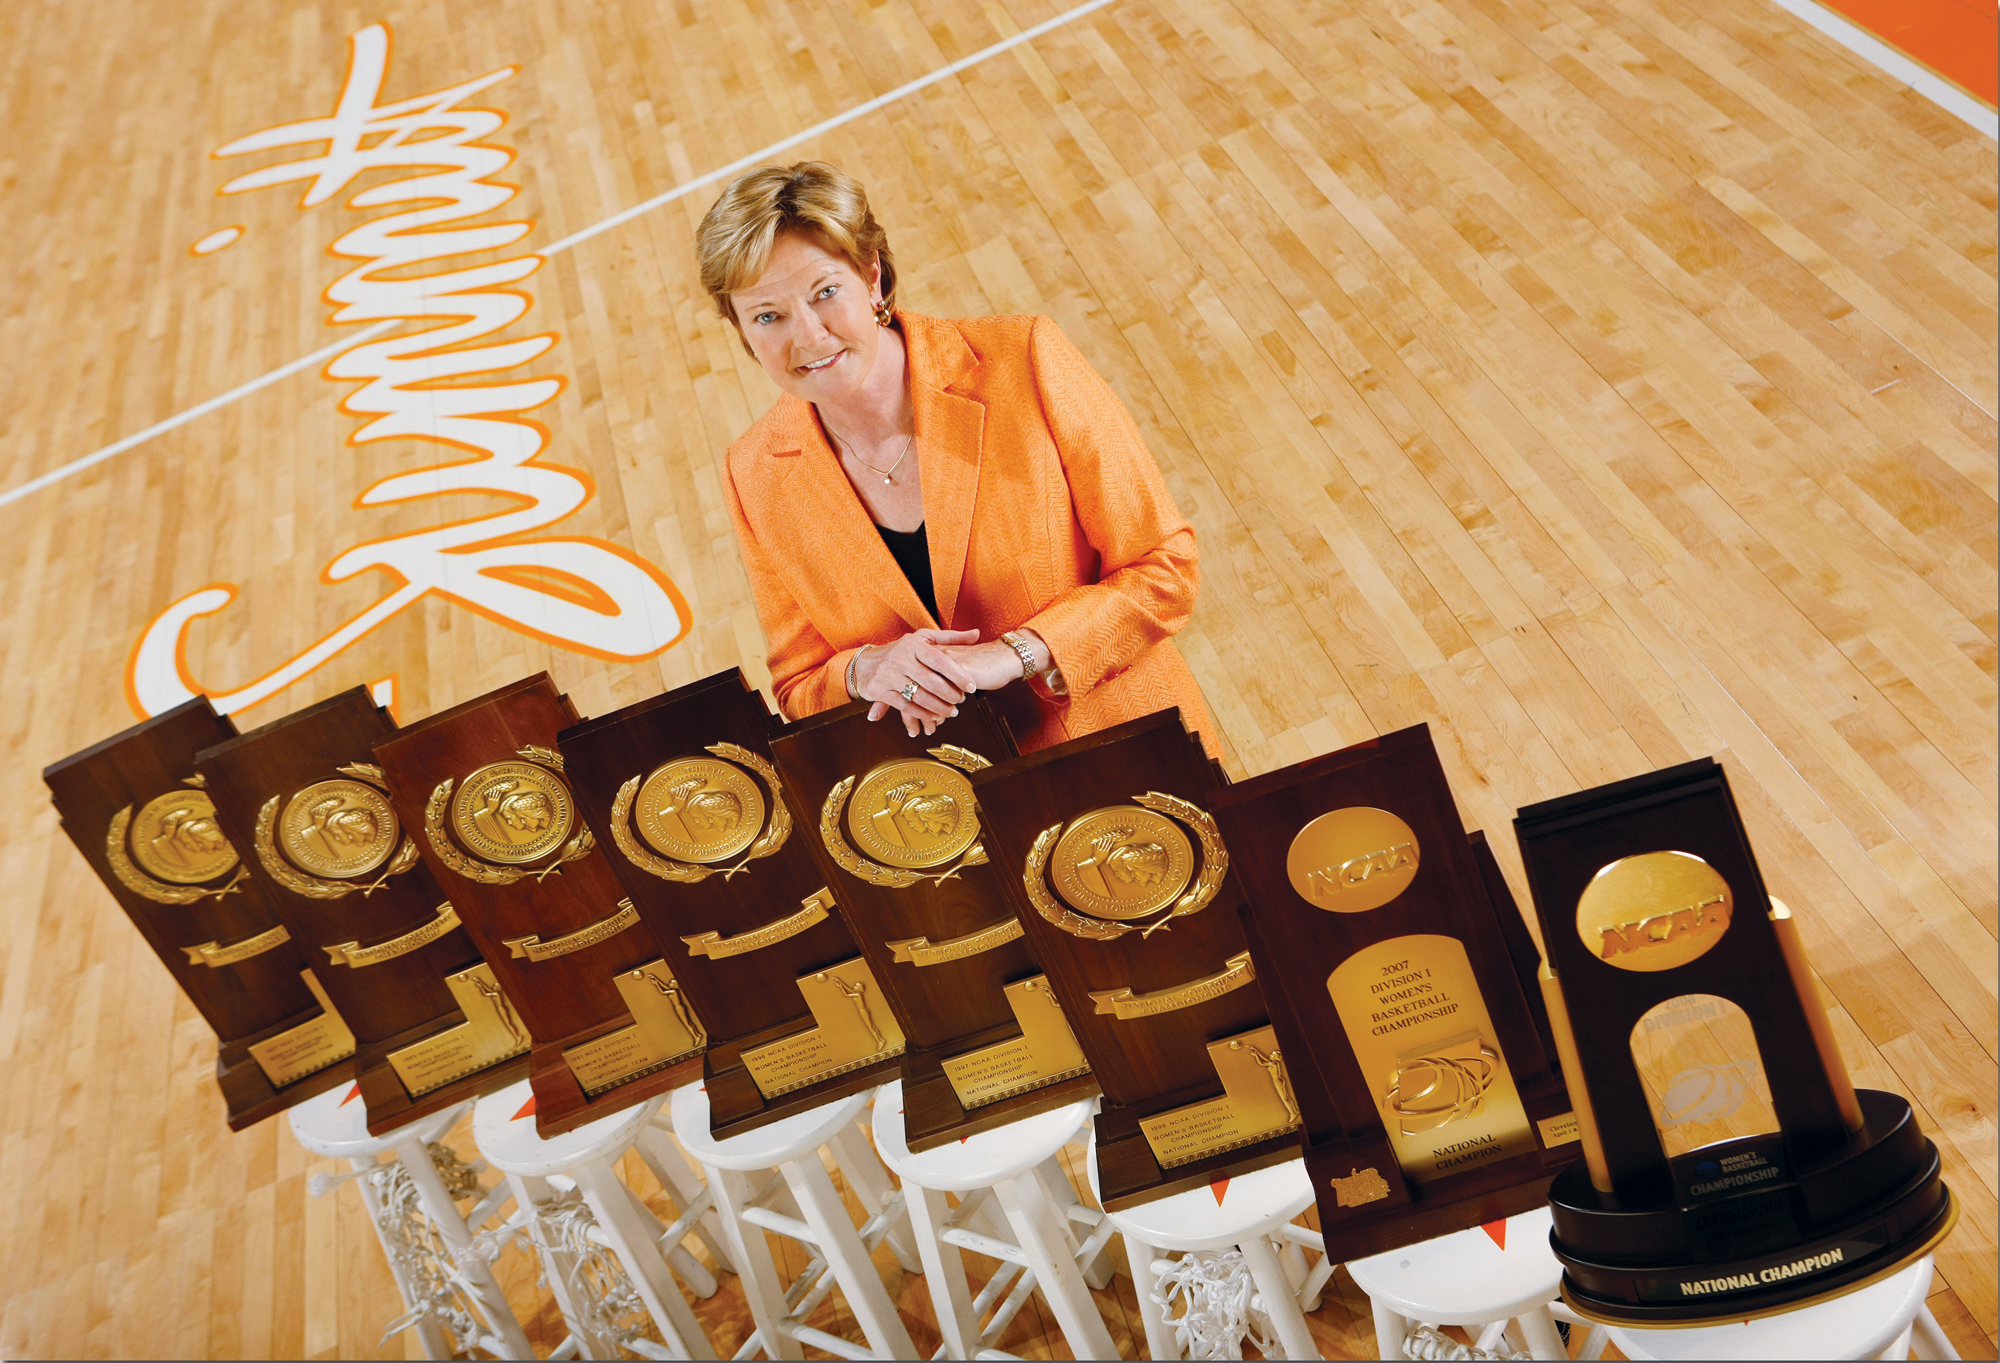 Pat Summitt — Our Tennessee